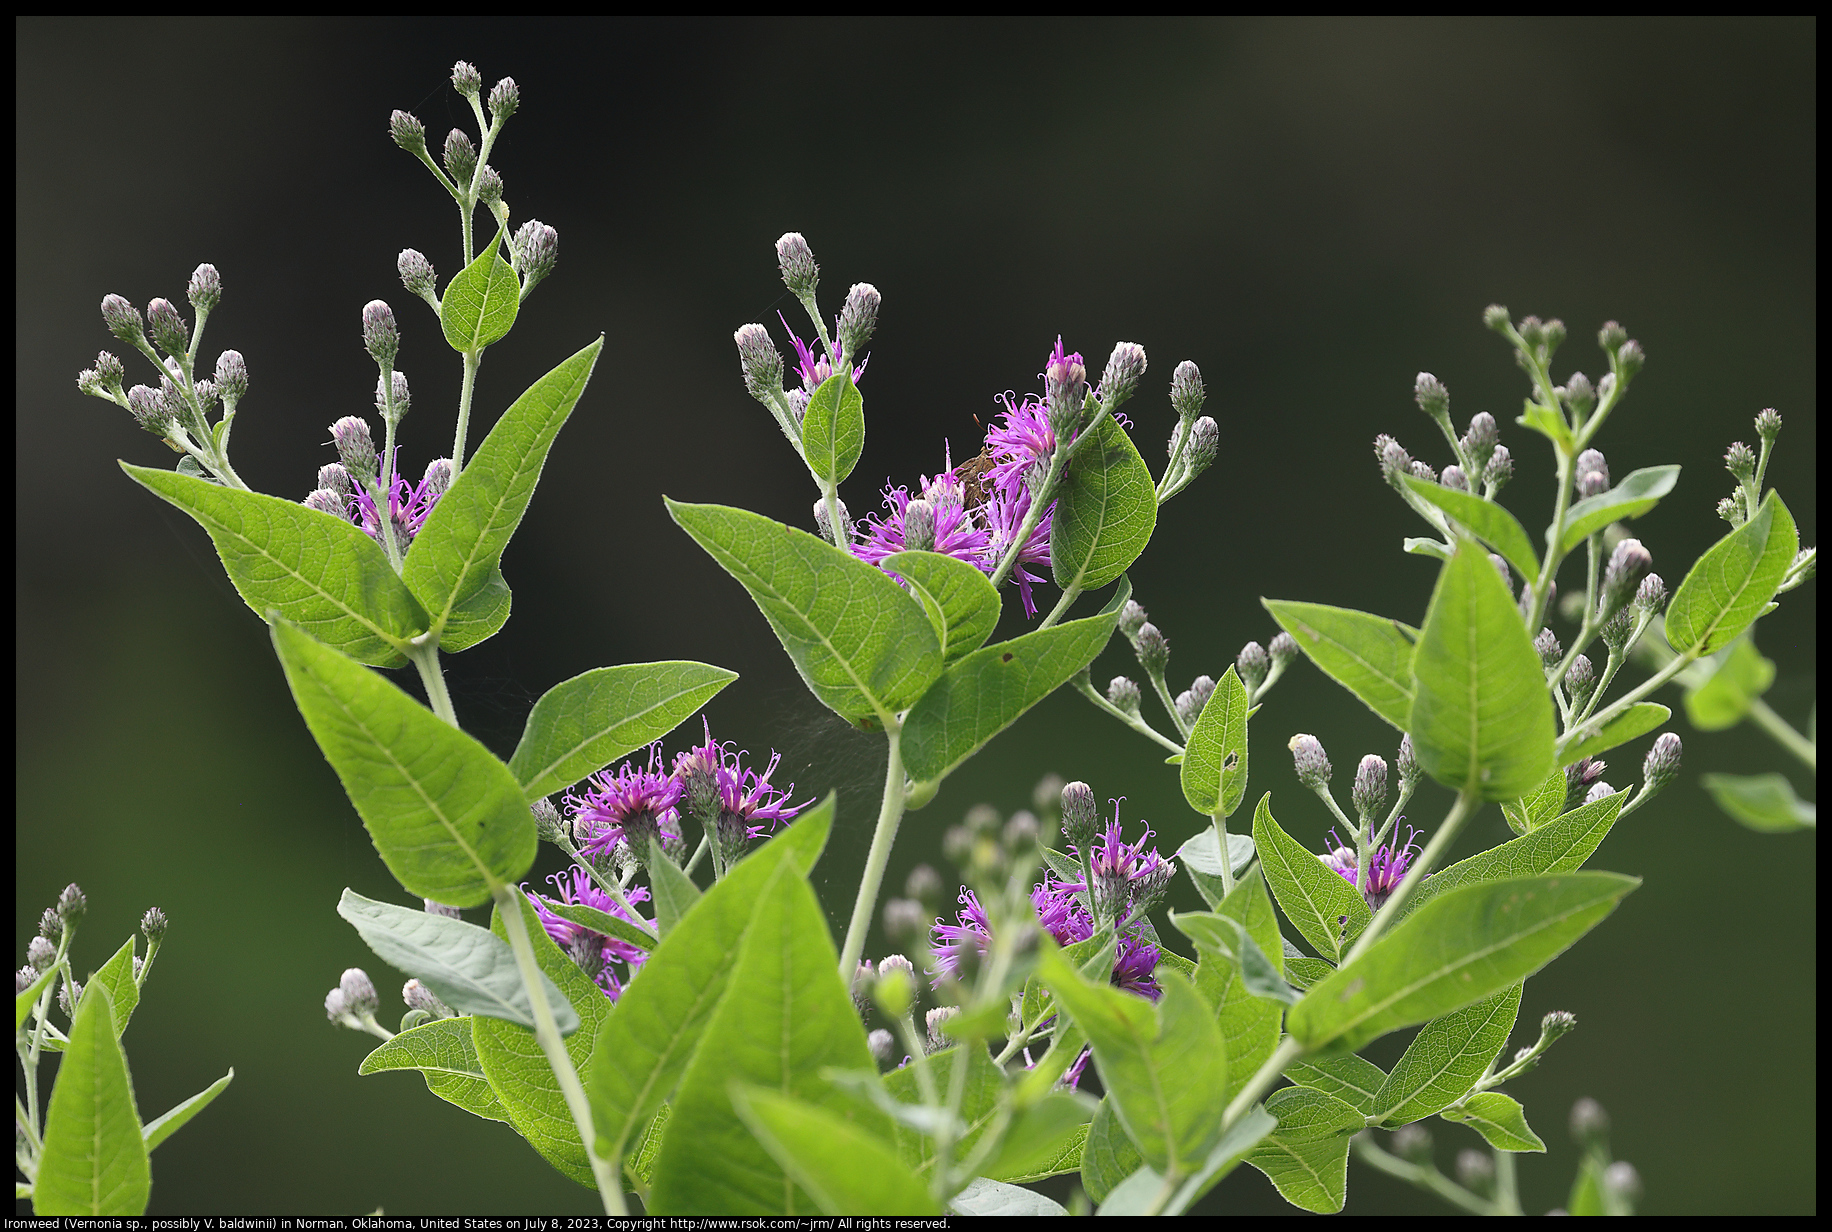 Ironweed (Vernonia sp., possibly V. baldwinii) in Norman, Oklahoma, United States on July 8, 2023